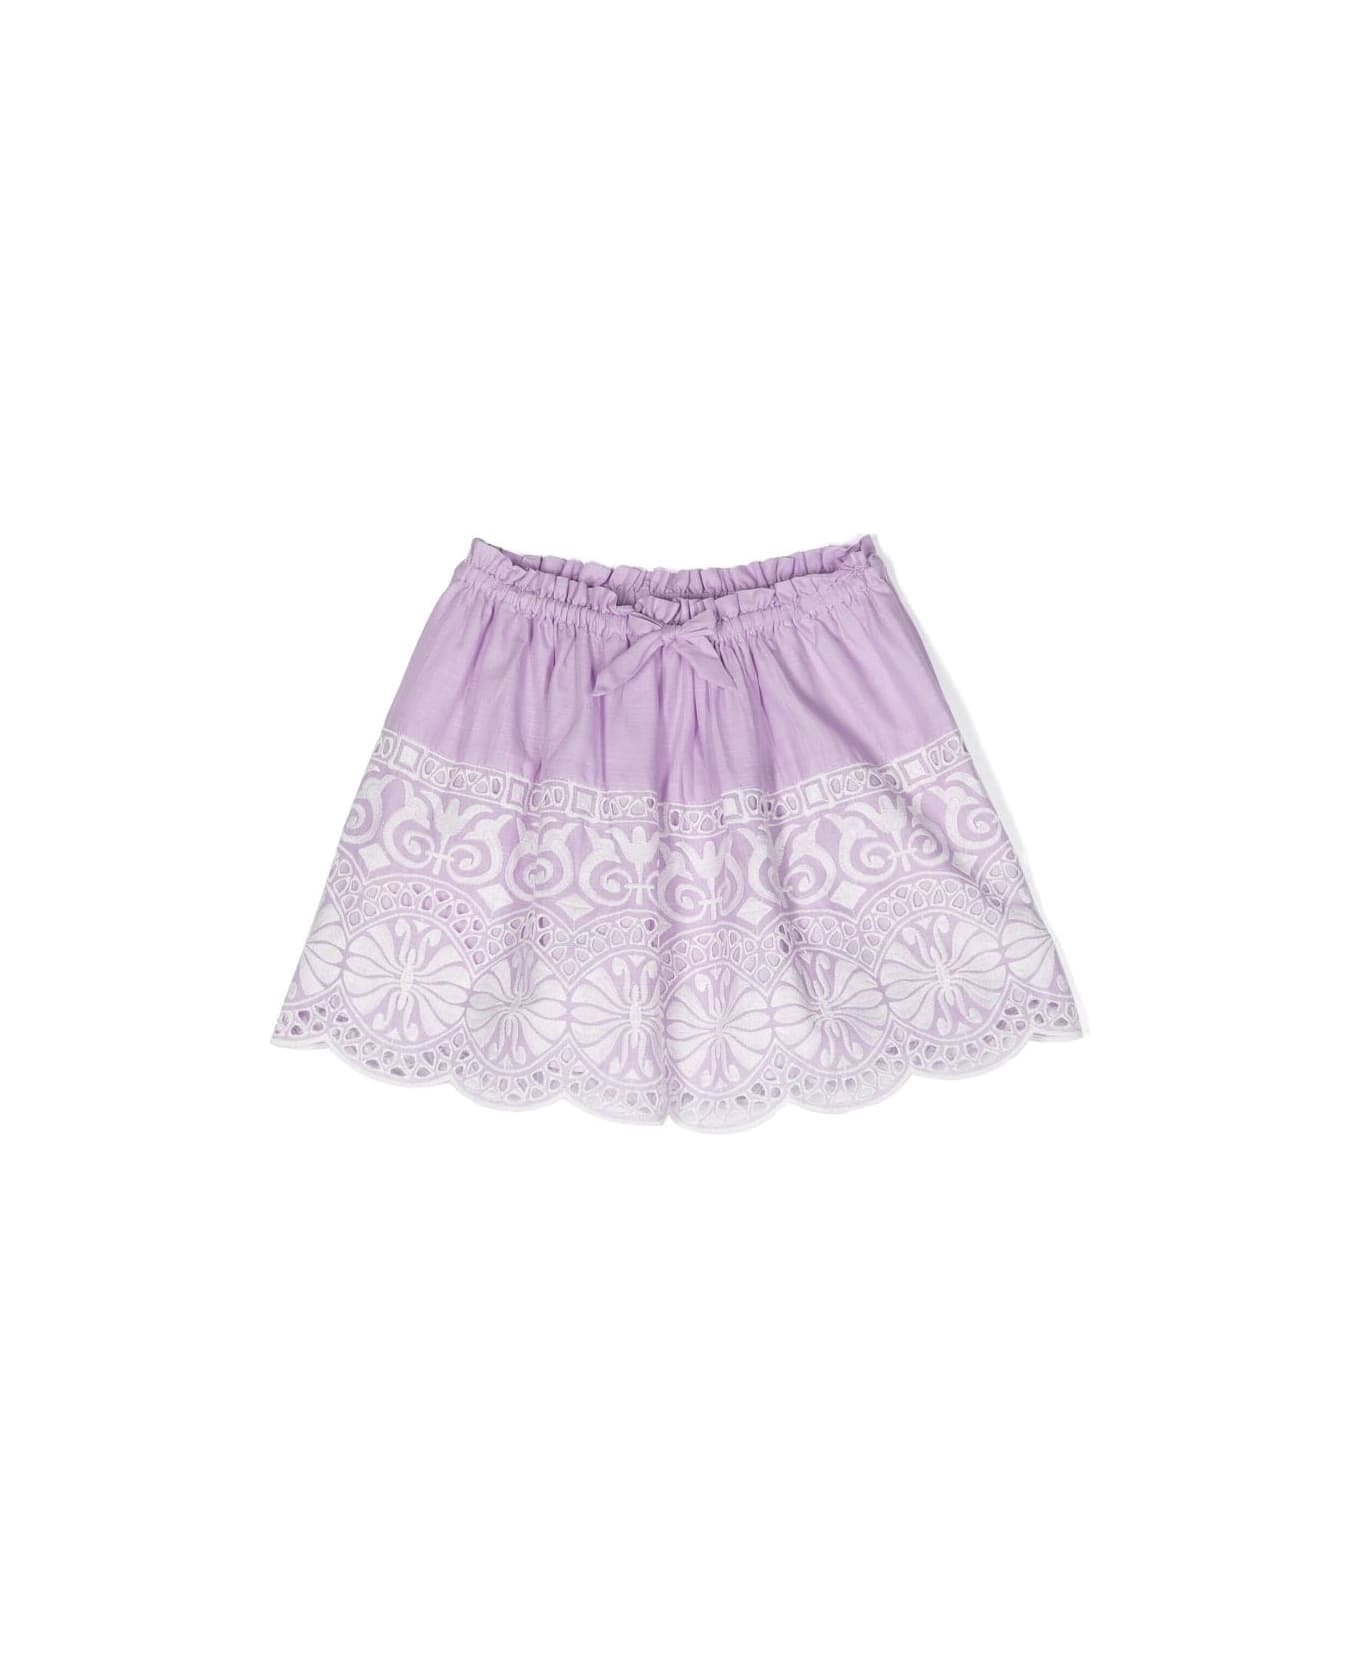 Zimmermann Skirt With Embroidery - Lilla